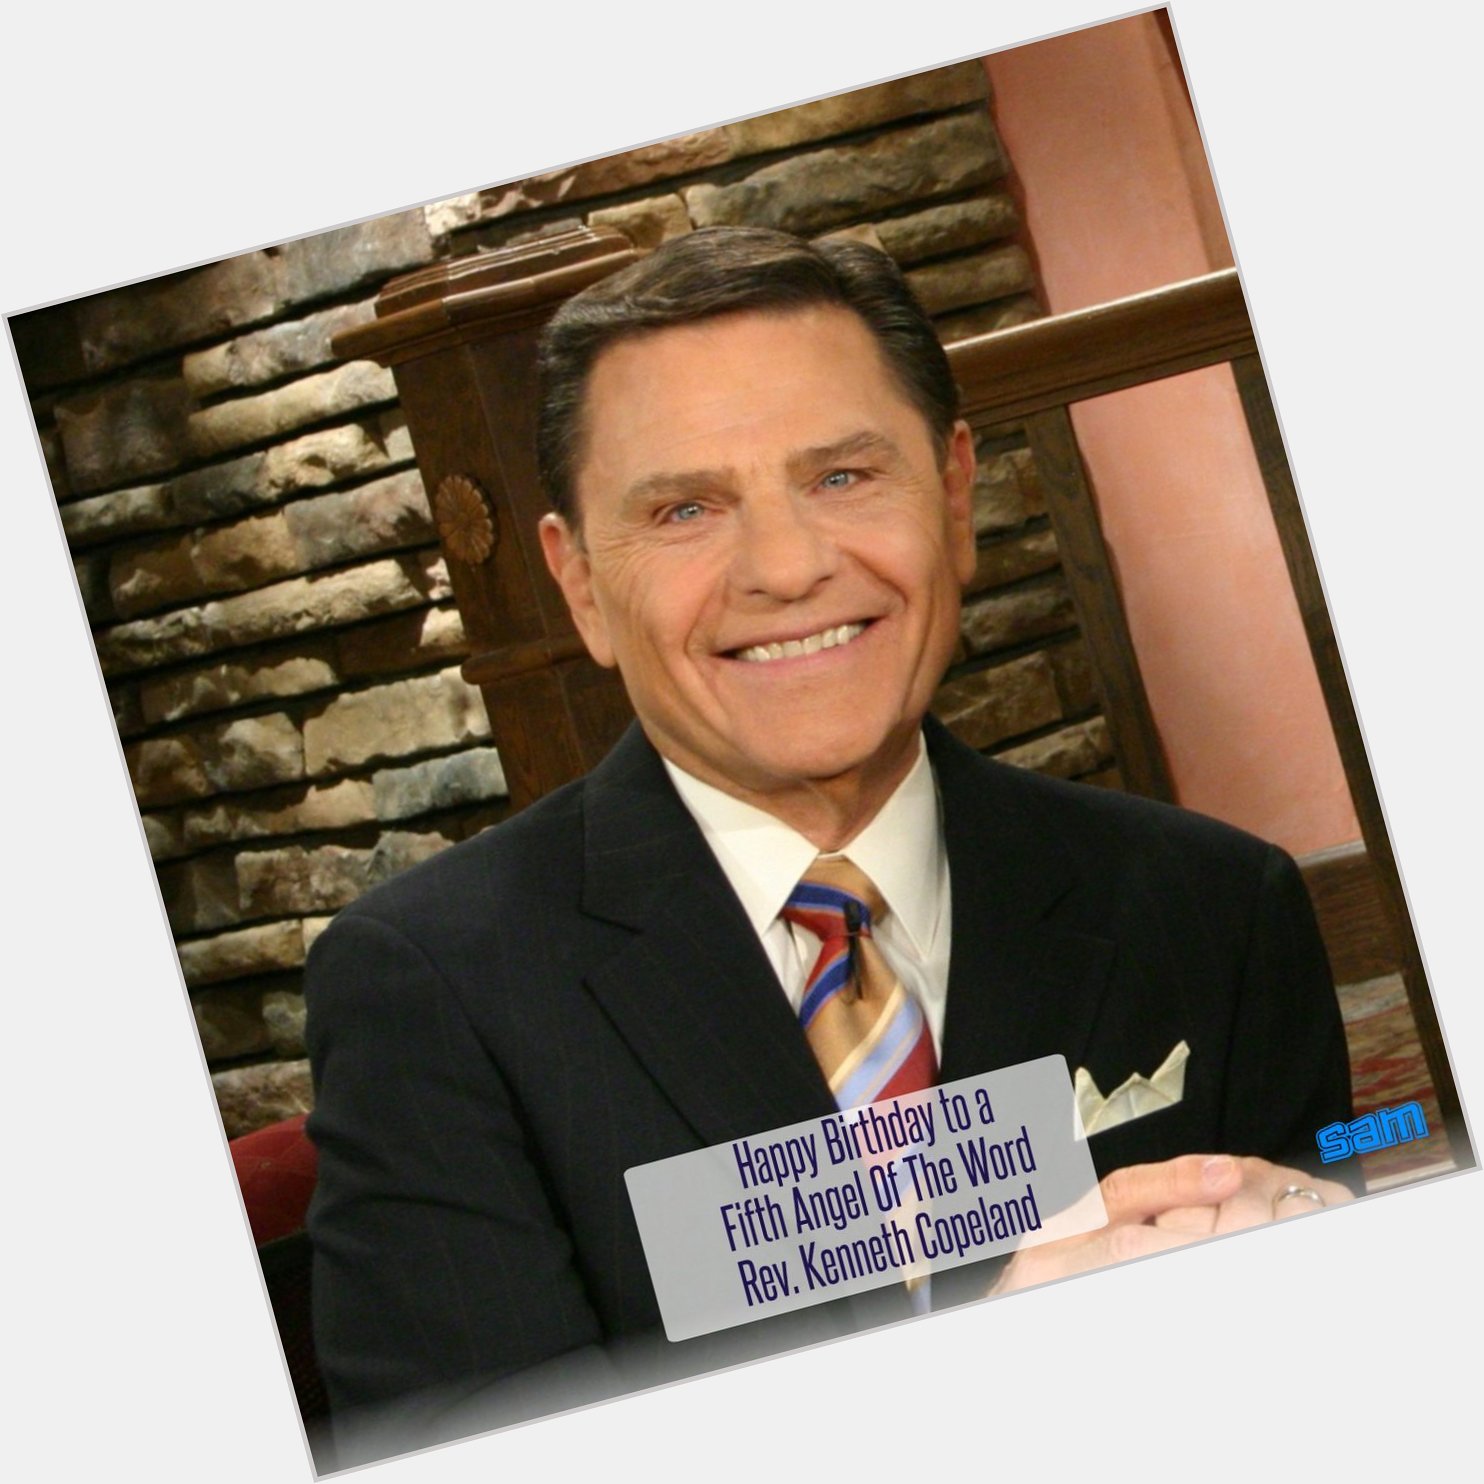 Happy Birthday to a Fifth Angel Of The Word, Rev. Kenneth Copeland. 